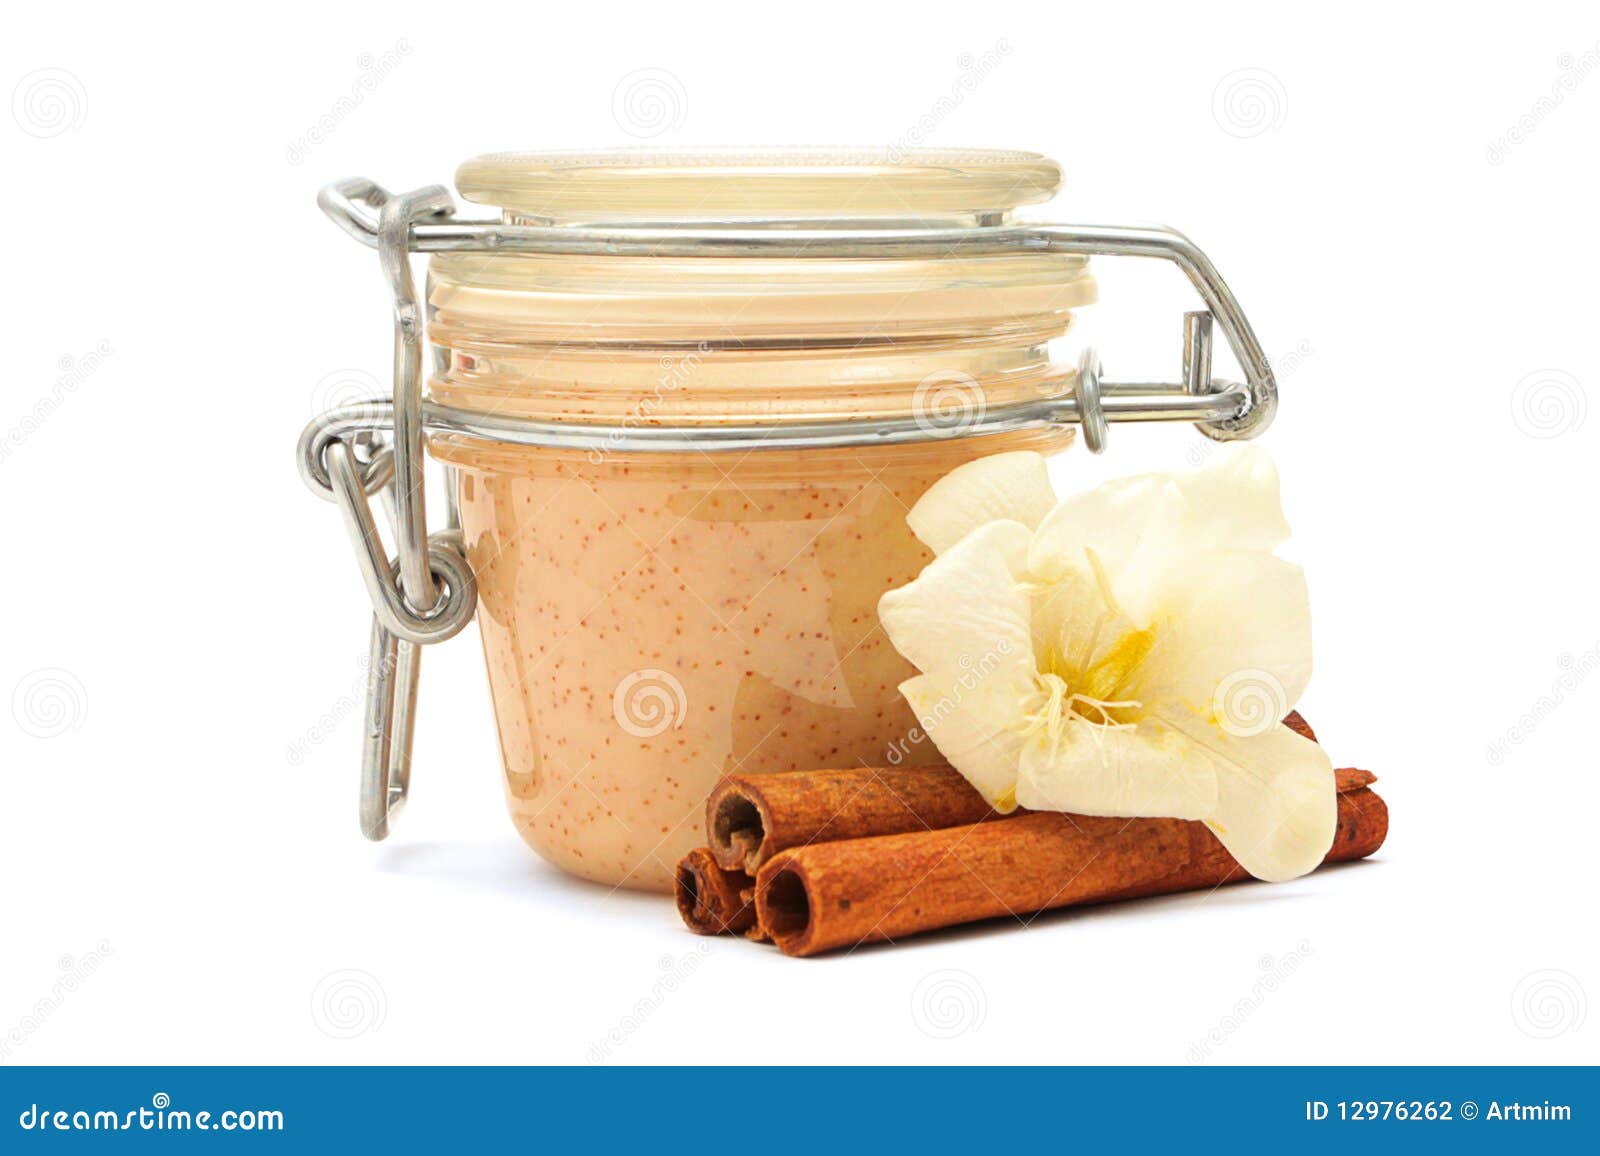 Closed jar with some creamy substance and cinnamon. Closed jar with some creamy substance, white flower and cinnamon on a white background